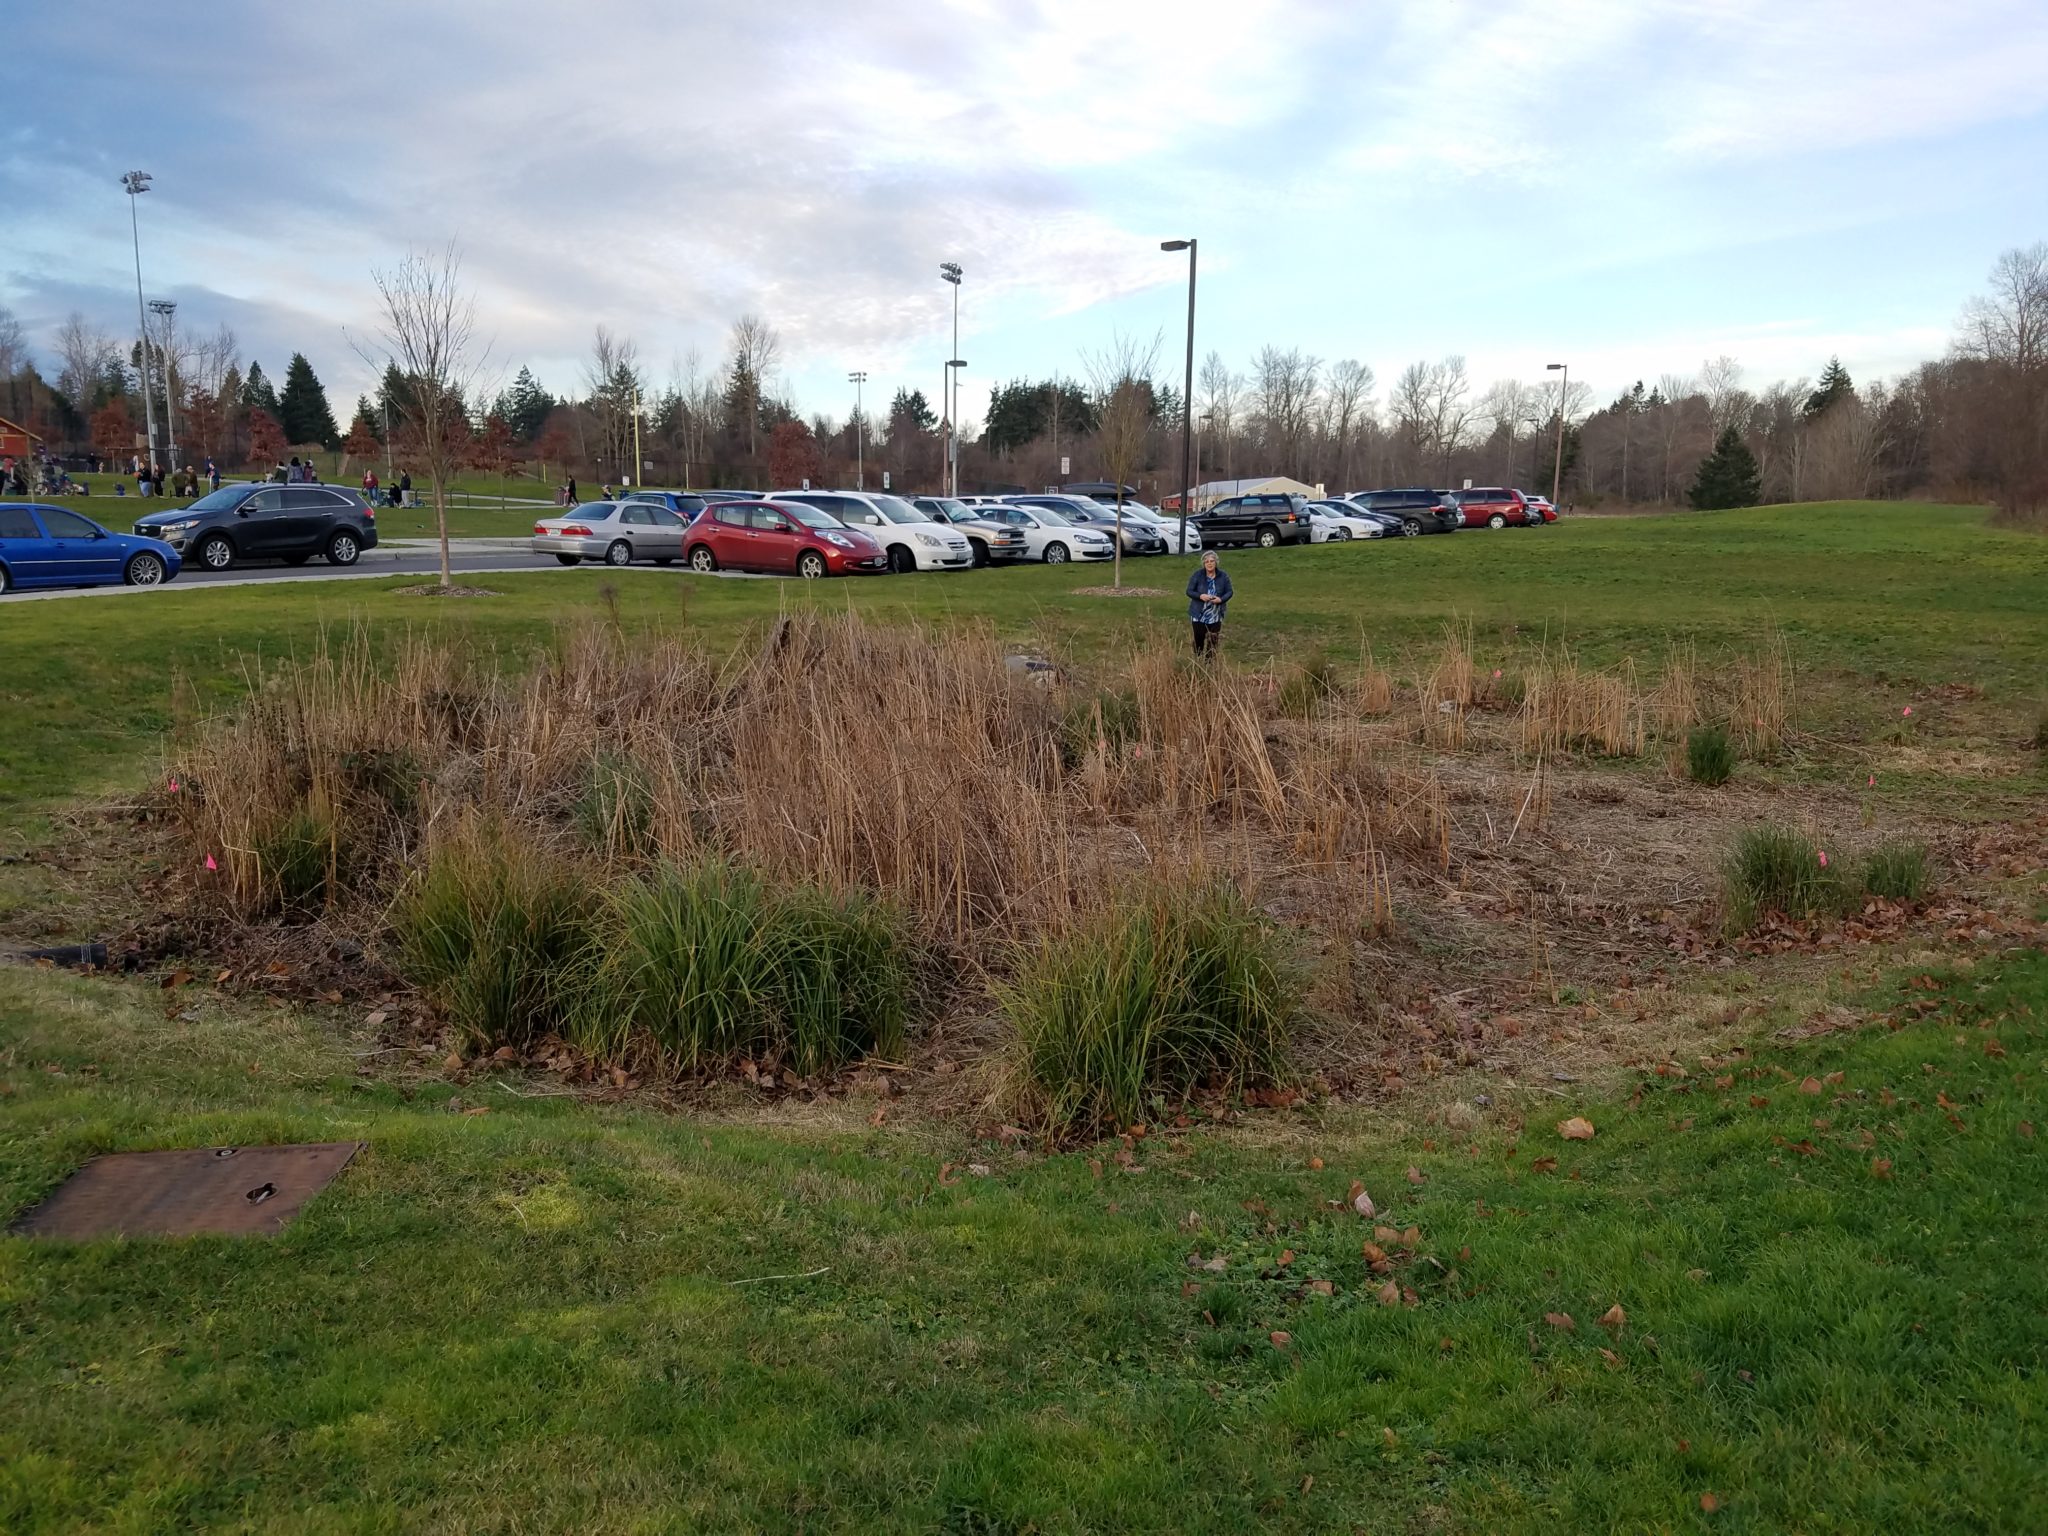 Native plants are intentionally planted here to infiltrate stormwater and reduce pollution from the parking lot before it enters nearby Squalicum Creek.